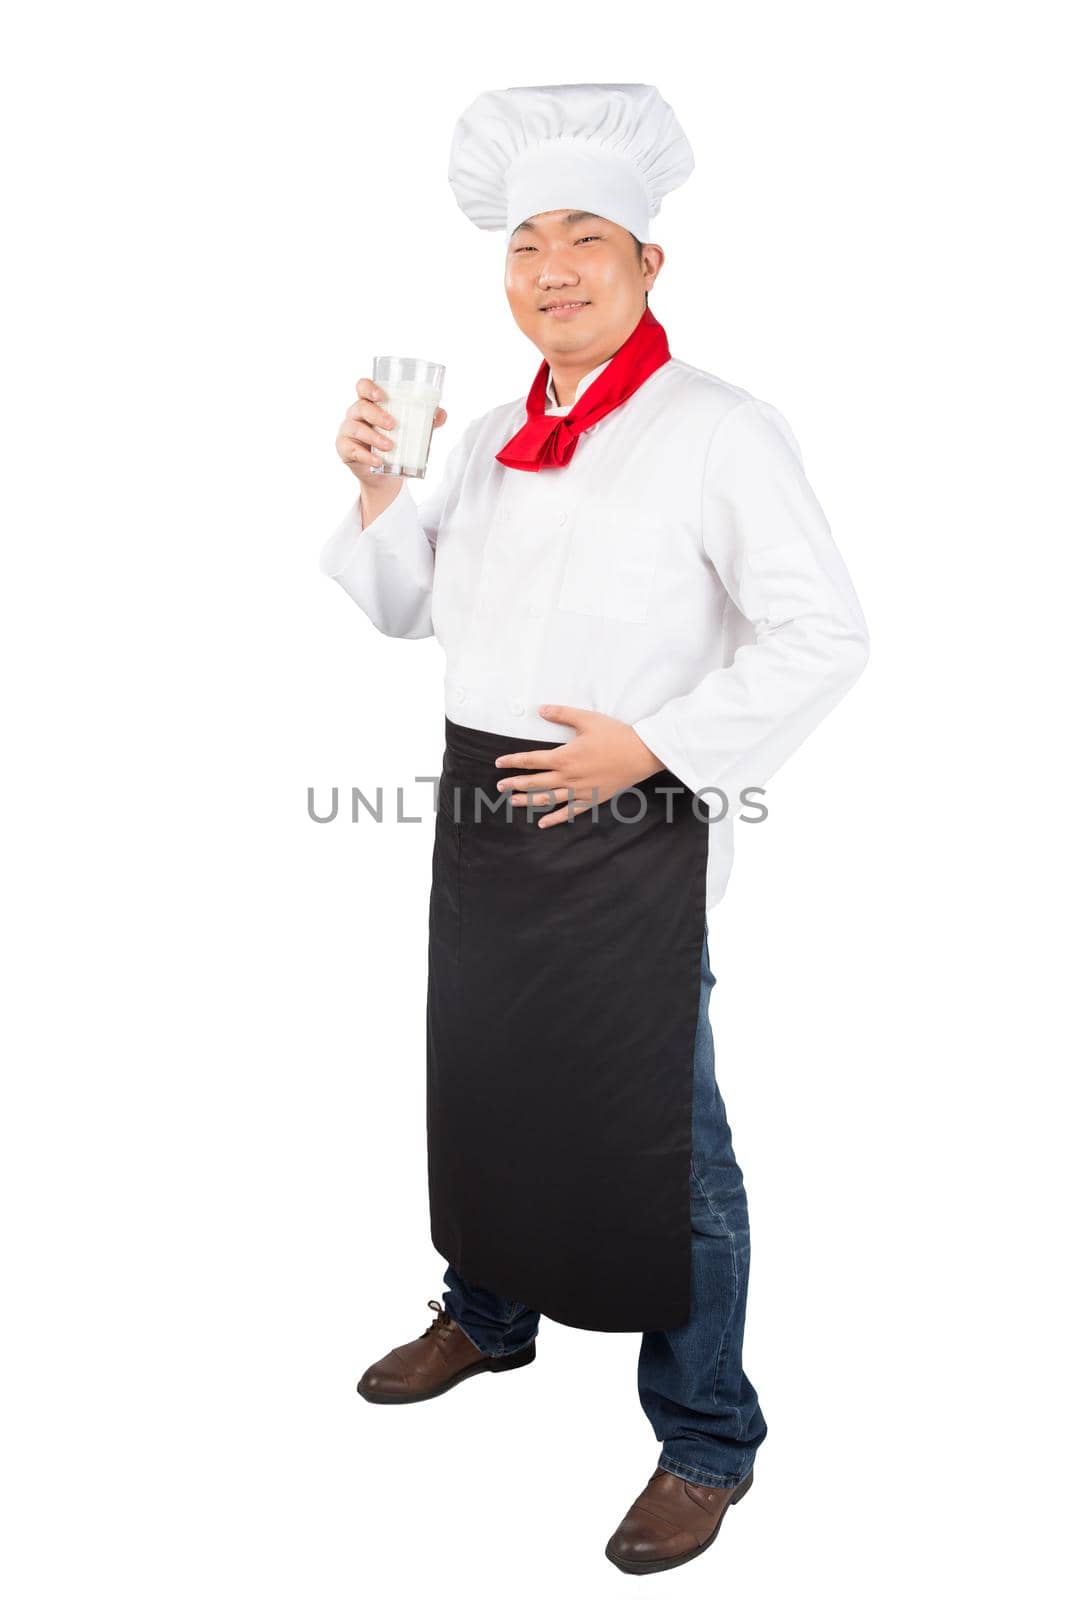 chef holding glass cup and drink yogurt or milk nice photo